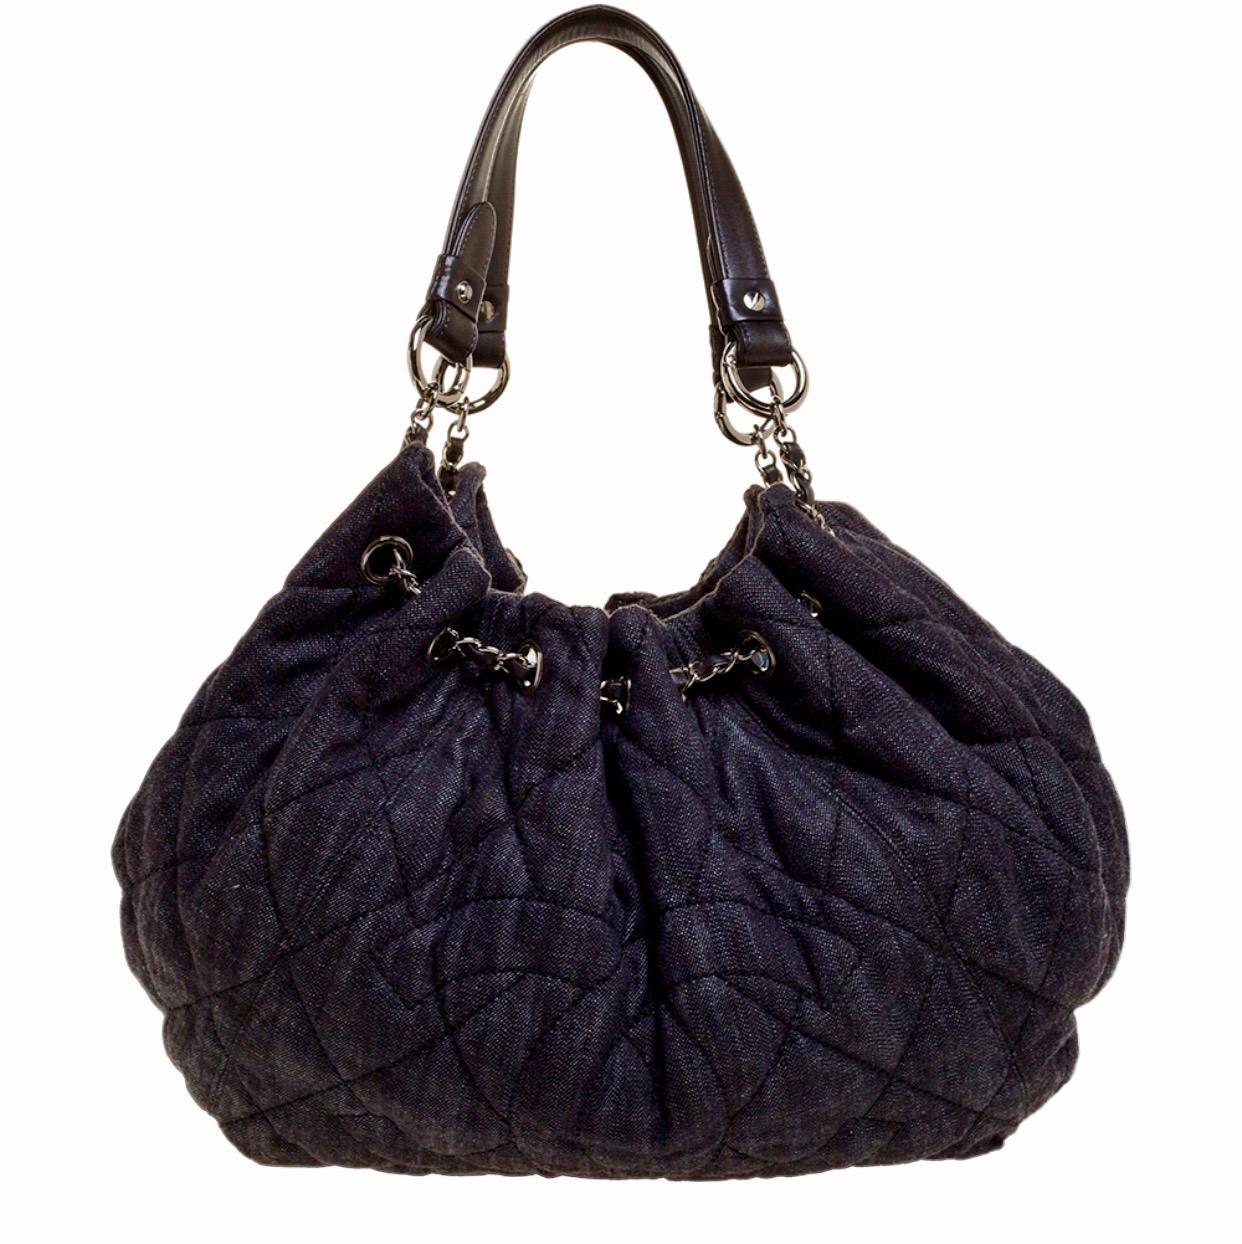 A CHANEL signature piece that will last you for many years
Made of beautiful durable dark denim with quilted detail - perfect craftmanship!
With silver-colored hardware
Huge CC CHANEL detail on front
Fully lined
Stamped inside 